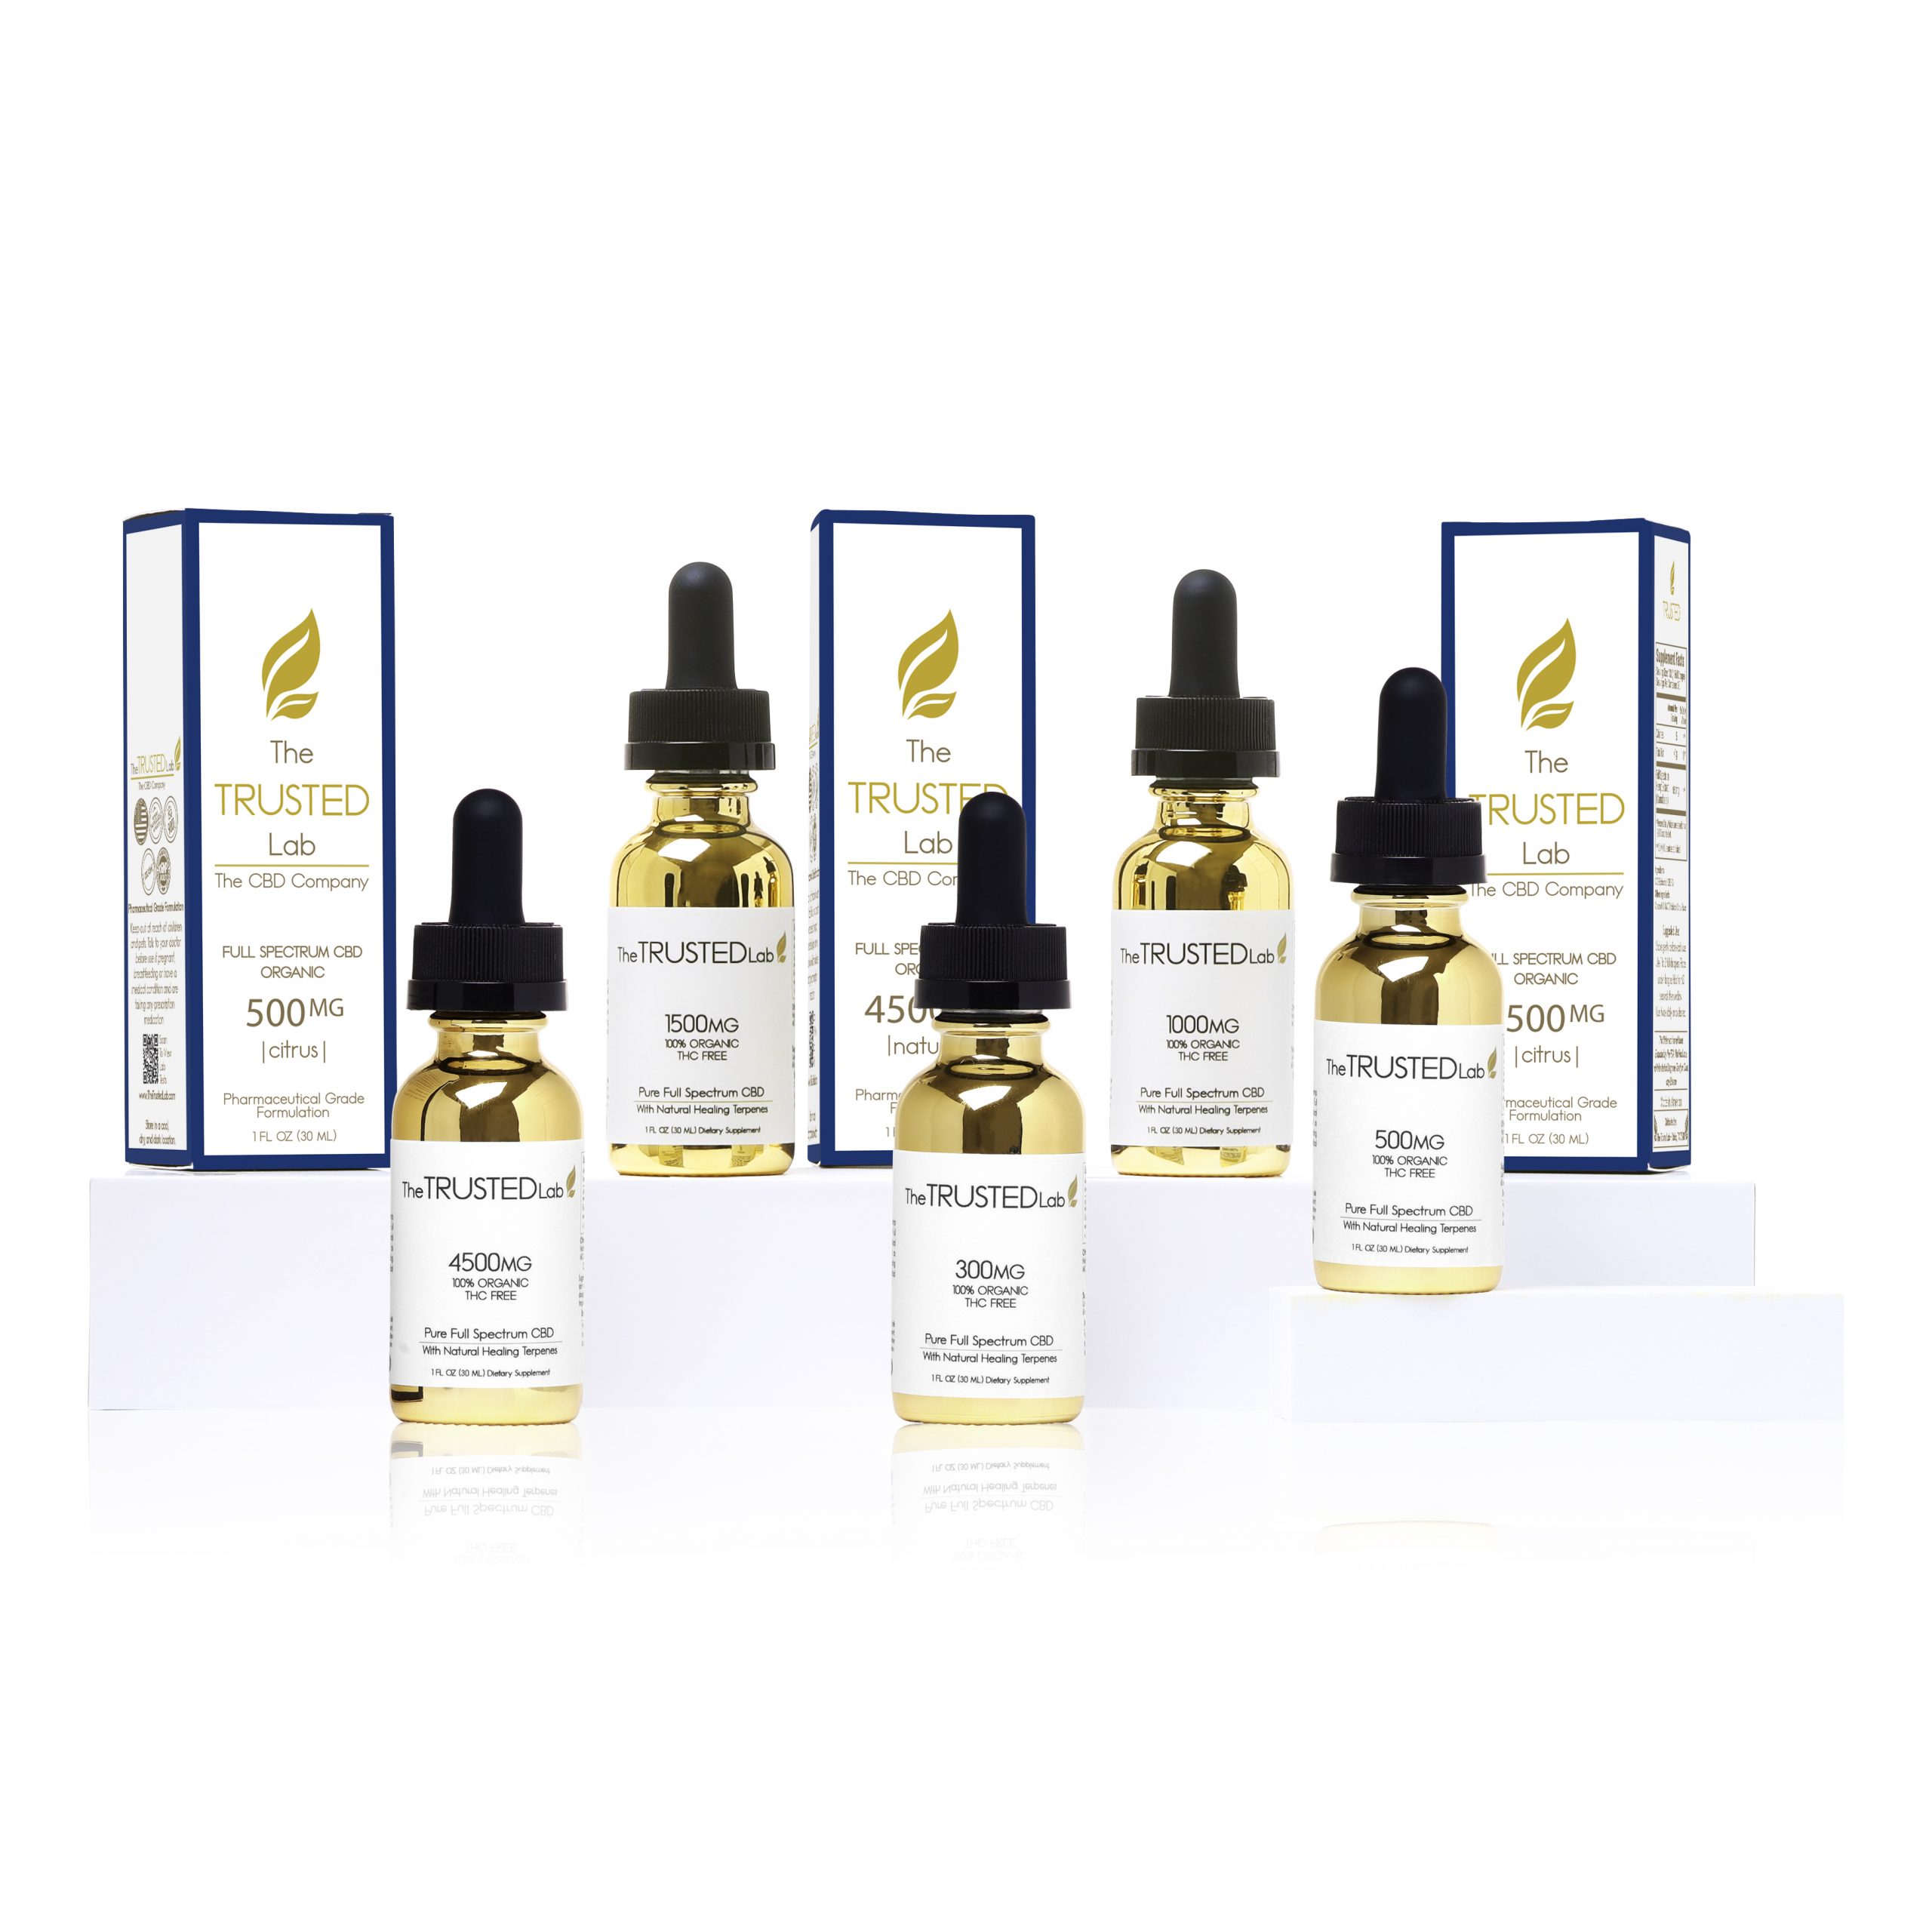 The Ultimate CBD An In-Depth Review By The Trusted Lab